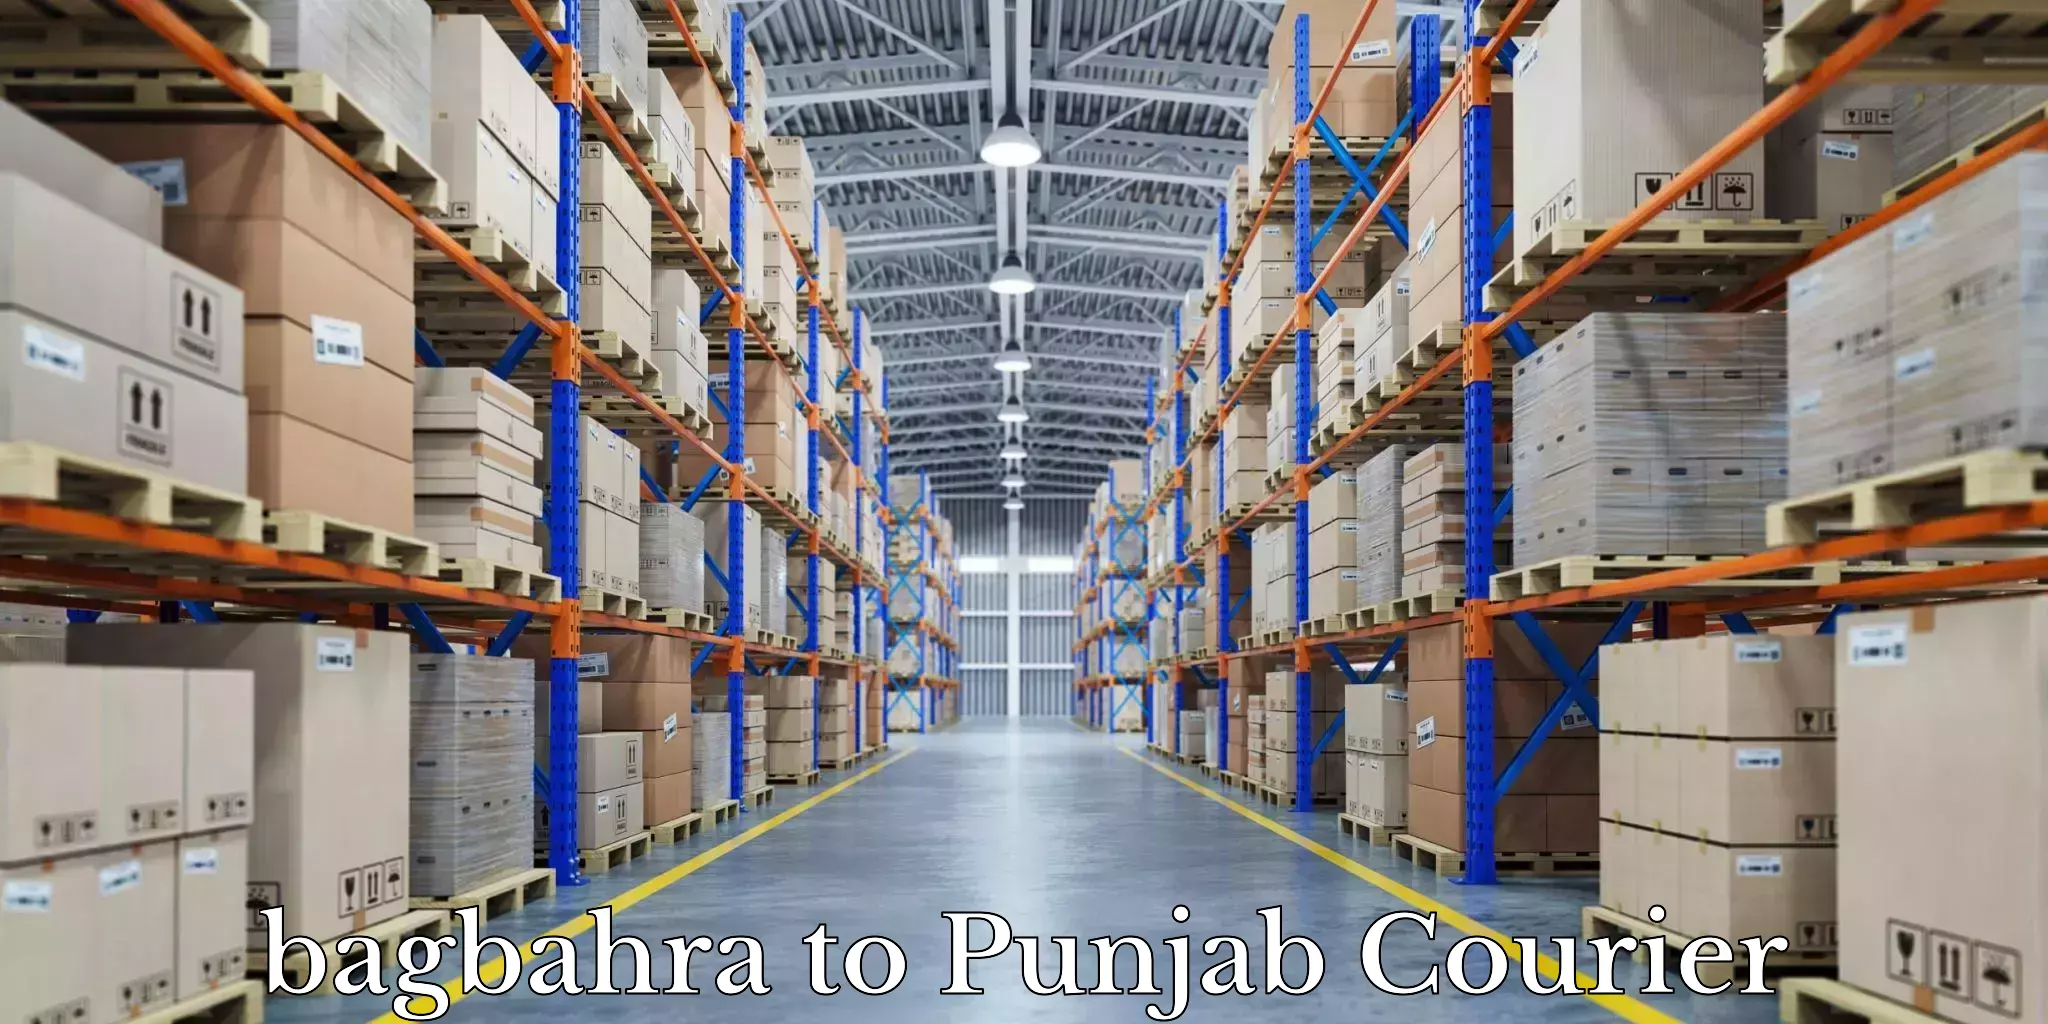 Reliable furniture movers bagbahra to Ludhiana